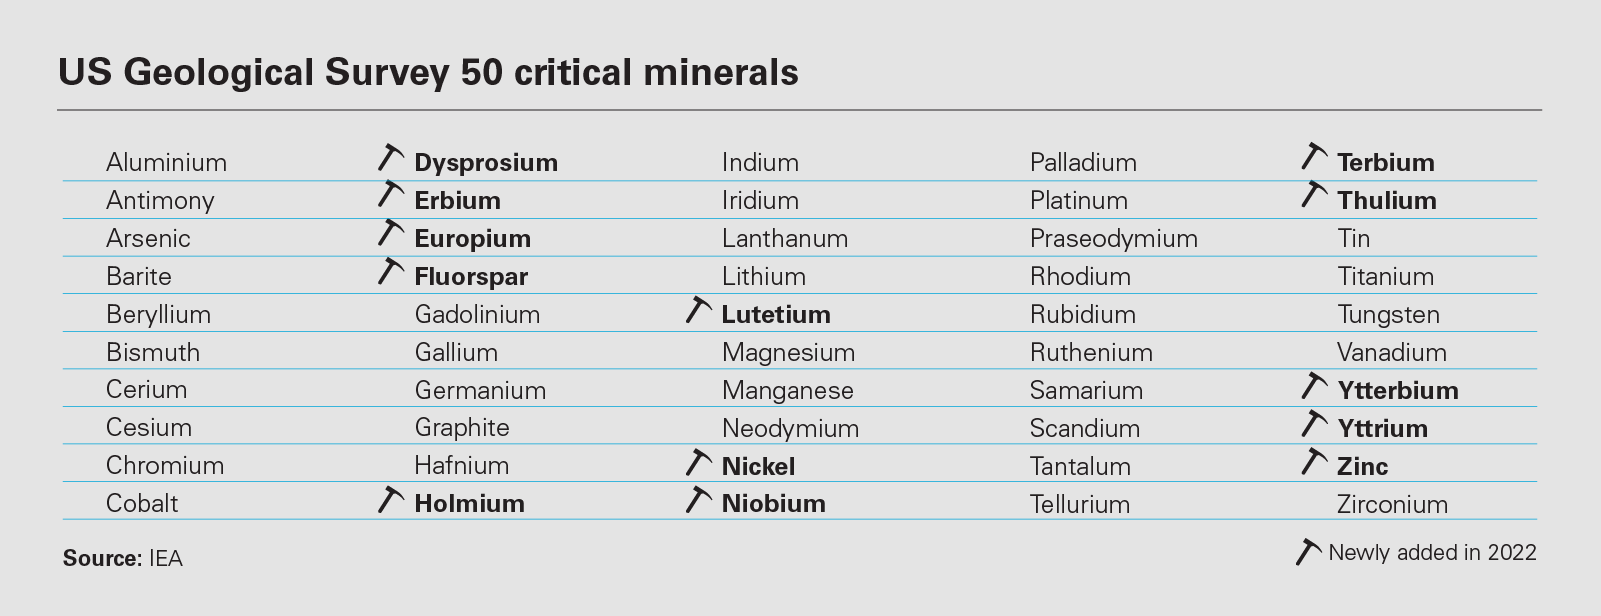 US Geological Survey 50 critical minerals